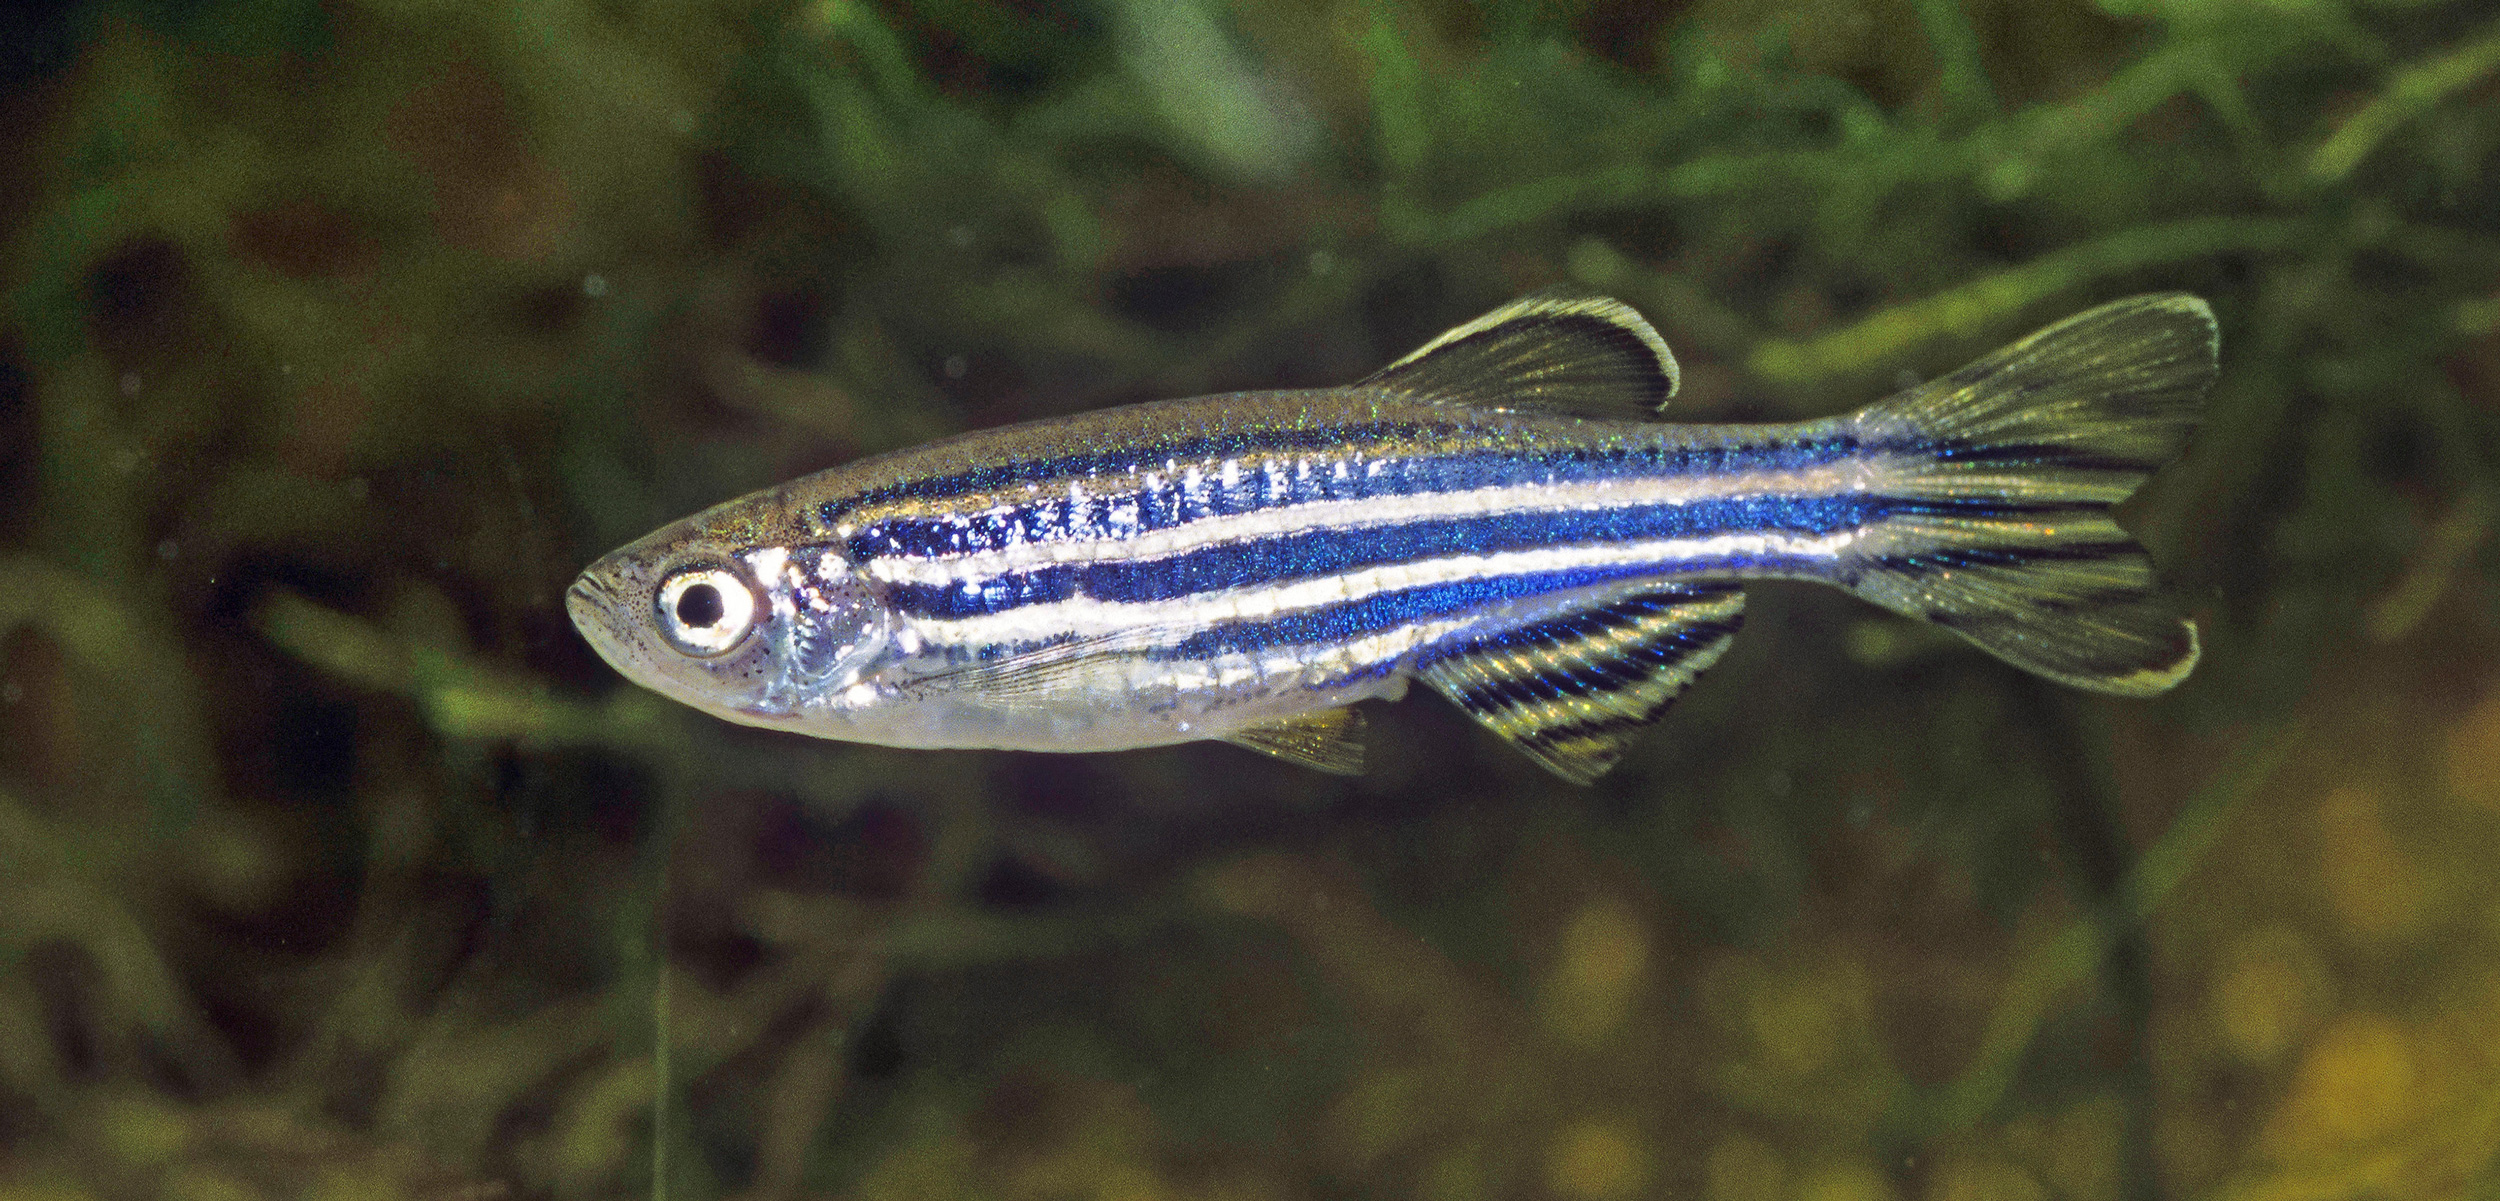 Zebrafish are one of the go-to species for studying genetic disorders. Photo by blickwinkel/Alamy Stock Photo